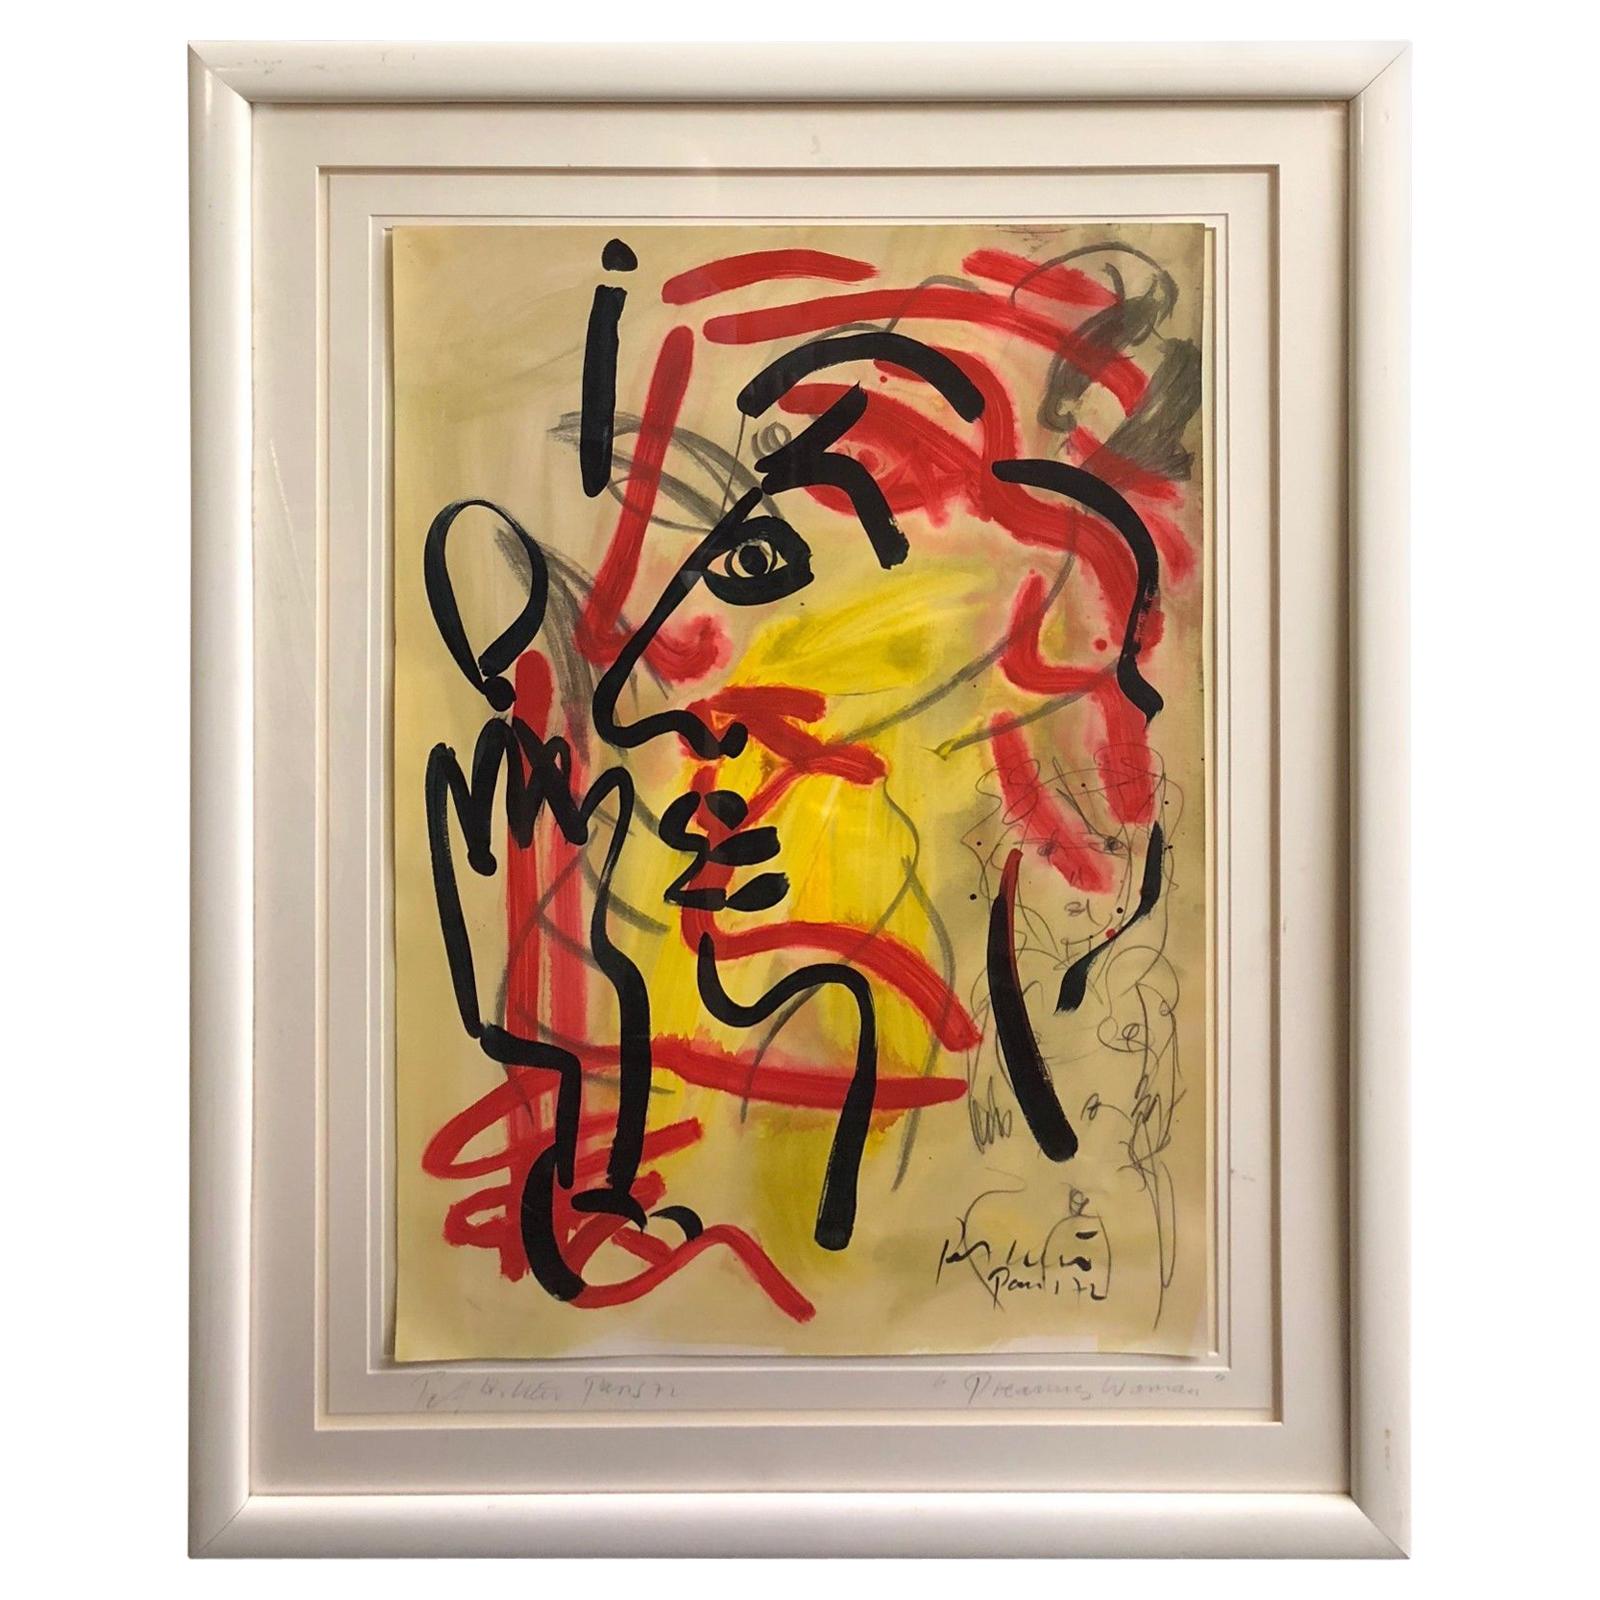 Peter Keil "Dreaming Woman" Abstract Expressionist Oil Painting